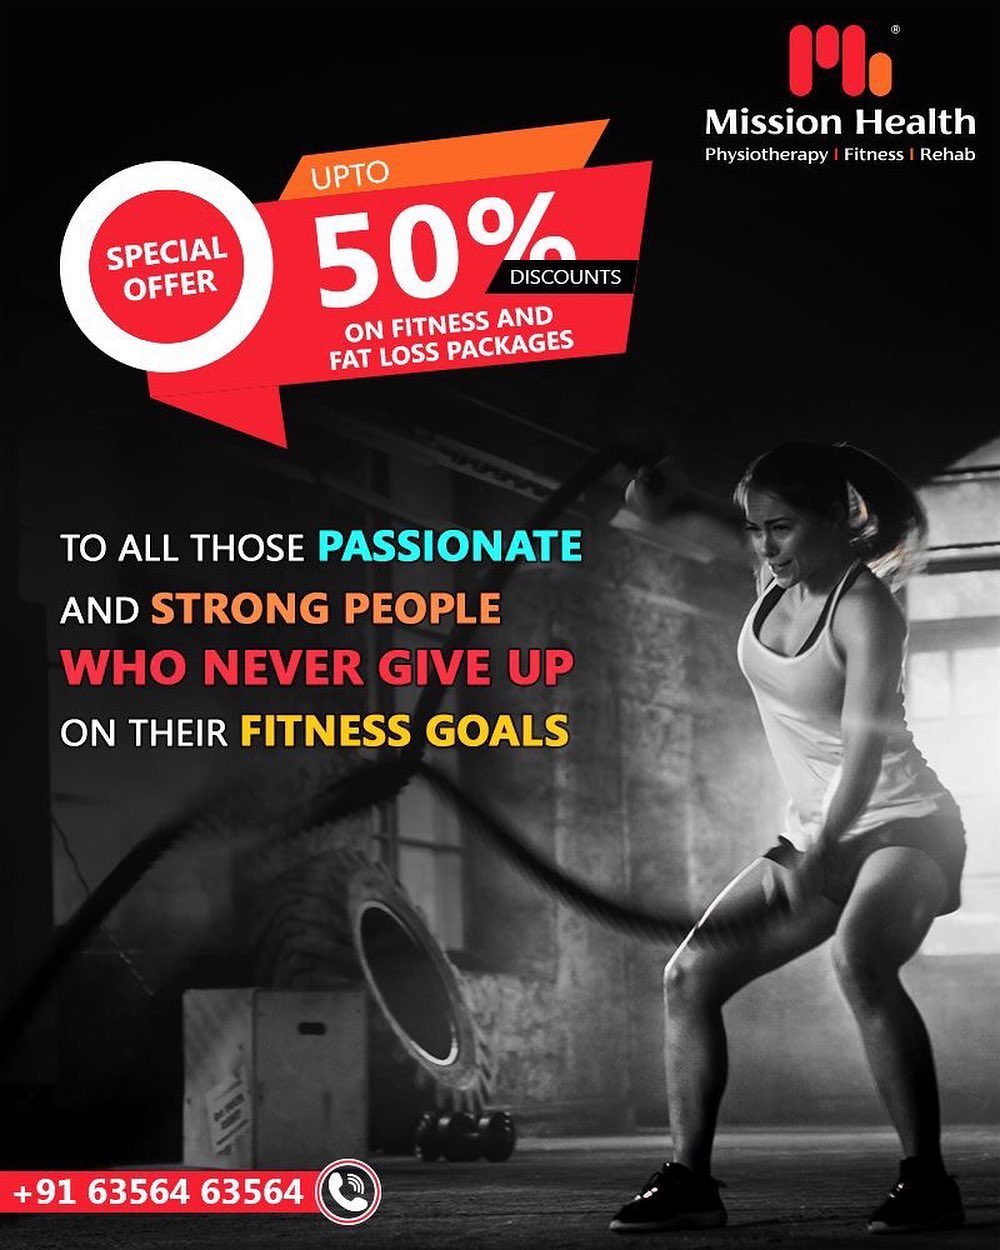 Here is our special offer for those who are passionate enough about their fitness and committed to fitness goals. 
Up to 50% off of various fitness & inch loss packages at Mission Health Fitness Boutique.
Few days left, hurry up!

Call: +916356463564
Visit: www.missionhealth.co.in

#fitnesspackages #gymoffers #inchloss #fitnessworkout #fitness #fitnessmotivation #workout #fitnesslife #gym #workoutmotivation #fitnessaddict #fitnesscoaching #healthchallenge #MissionHealth #MissionHealthIndia #MovementIsLife